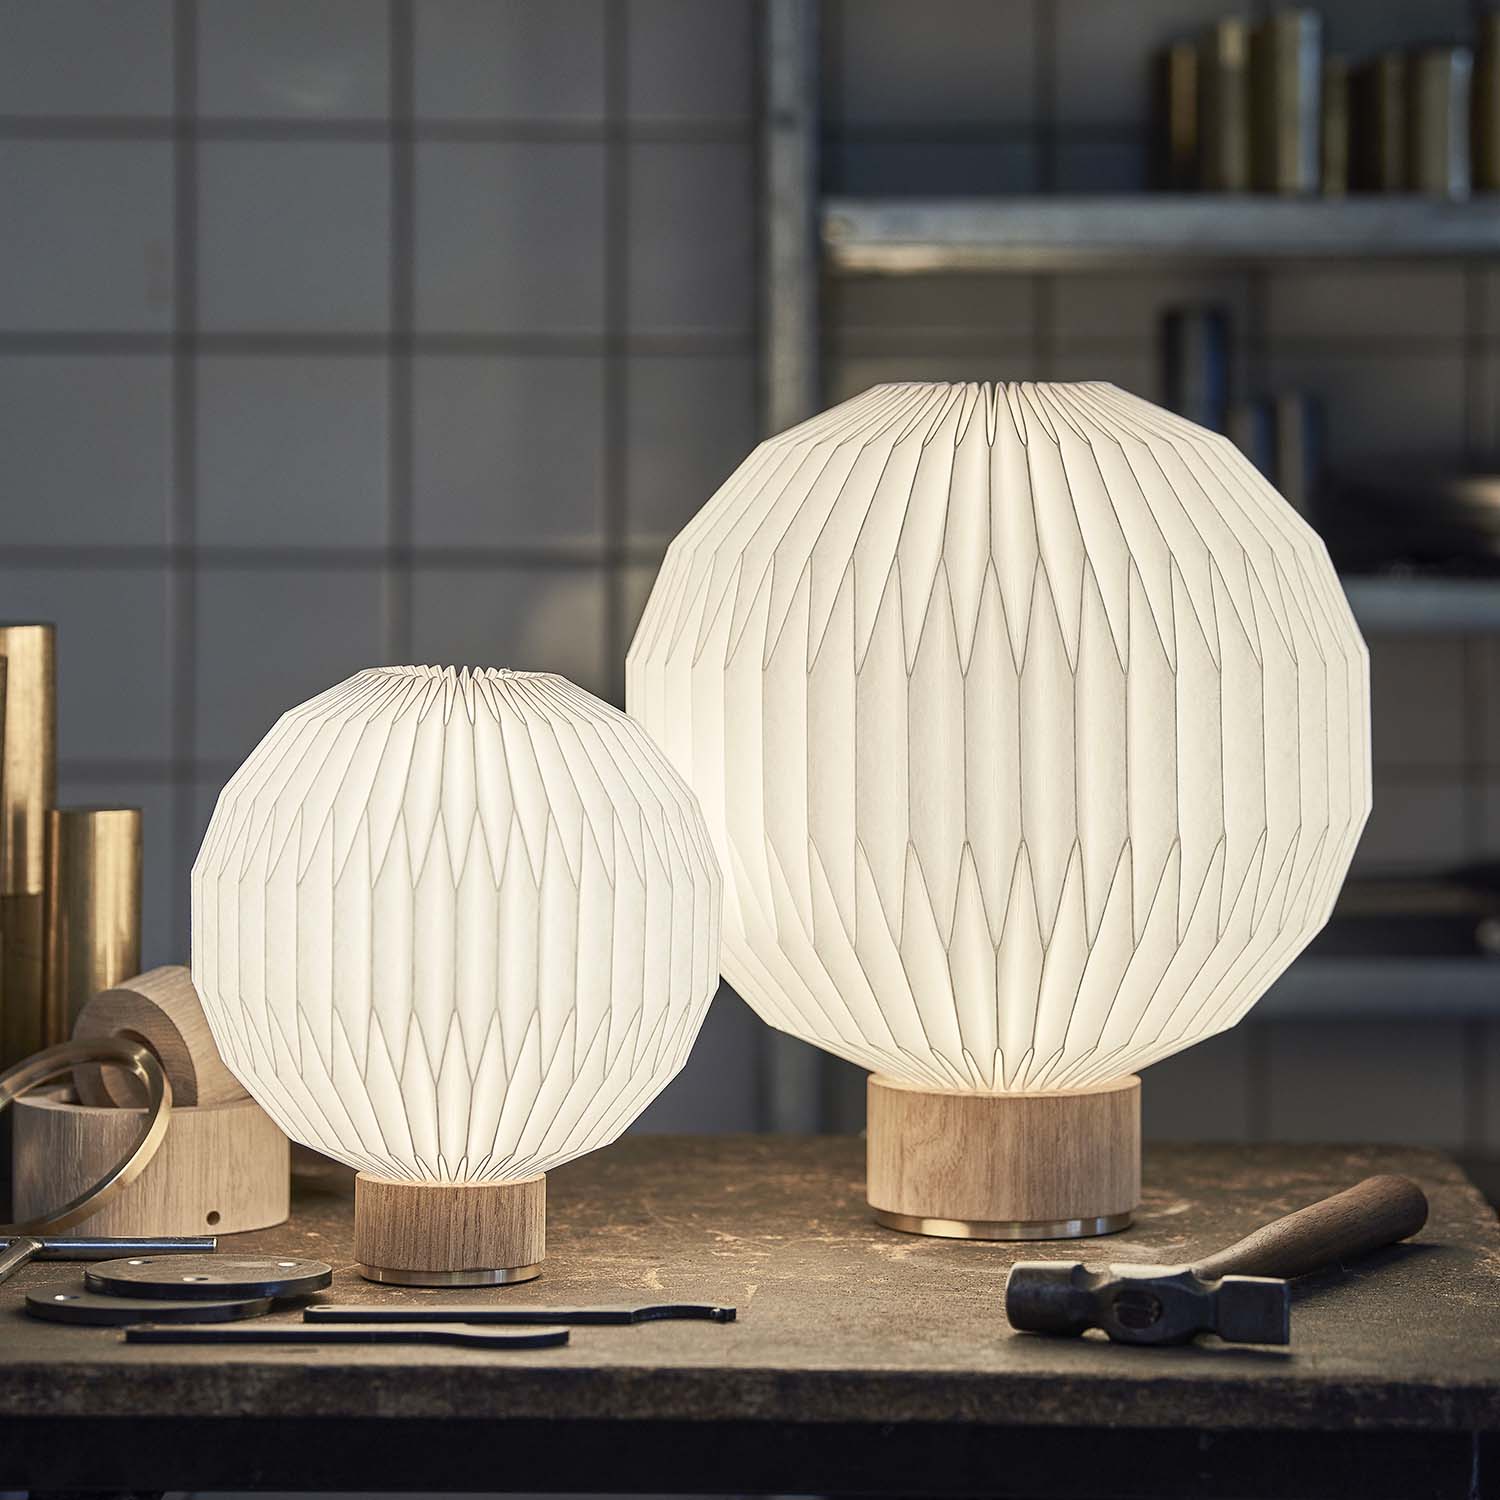 MODEL 375 - Handcrafted wood and white pleated paper table lamp